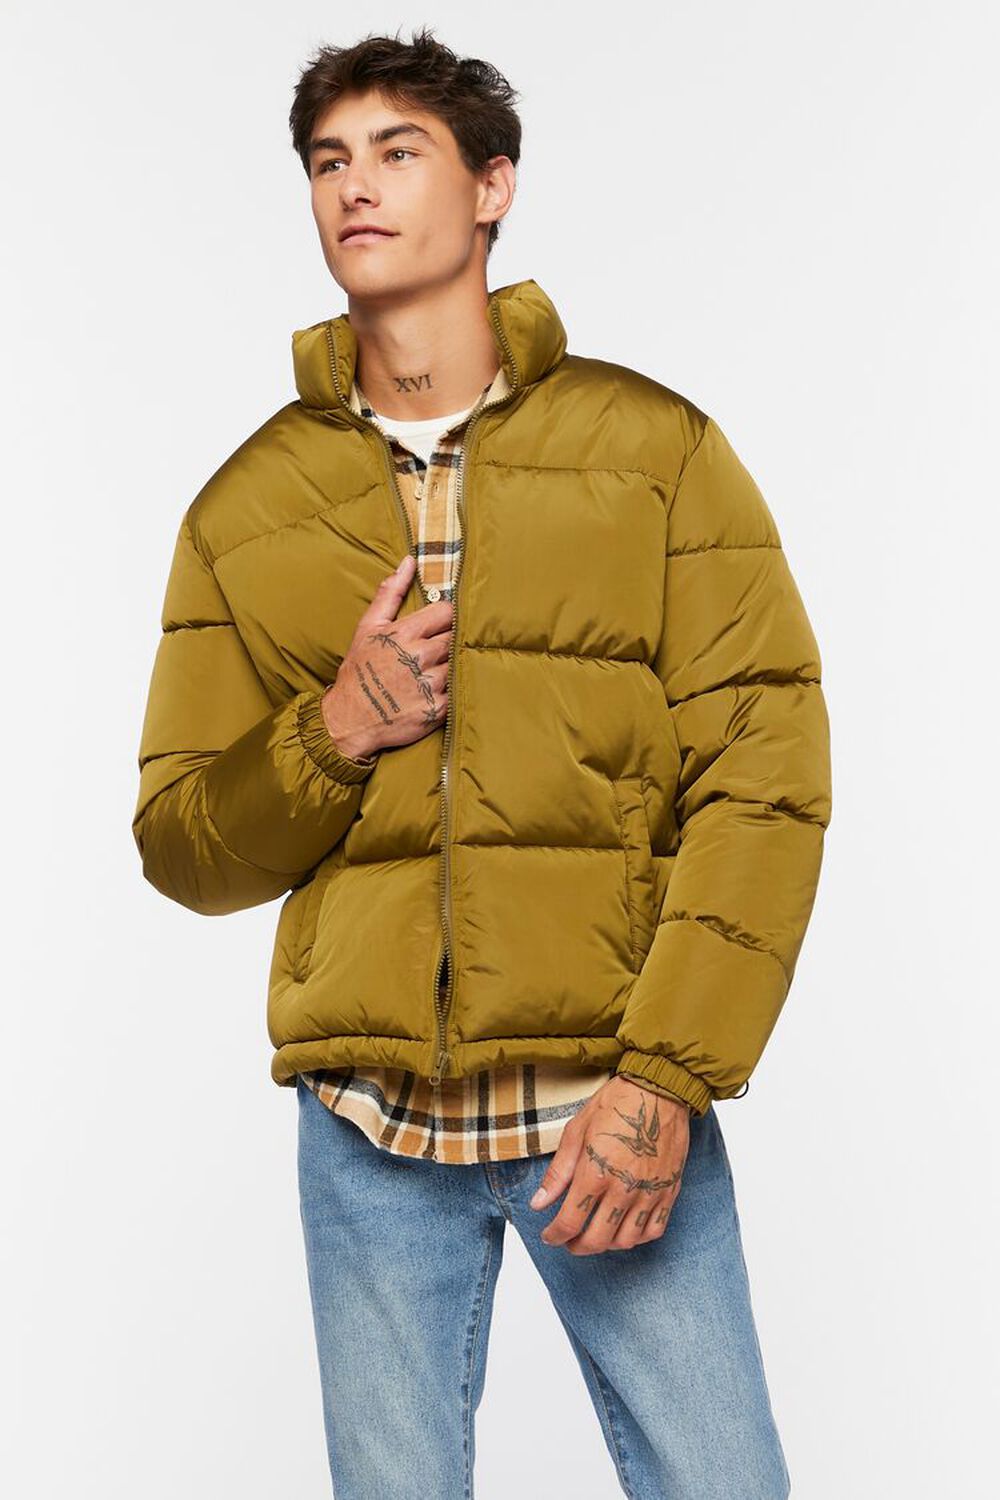 OLIVE Quilted Puffer Jacket, image 1